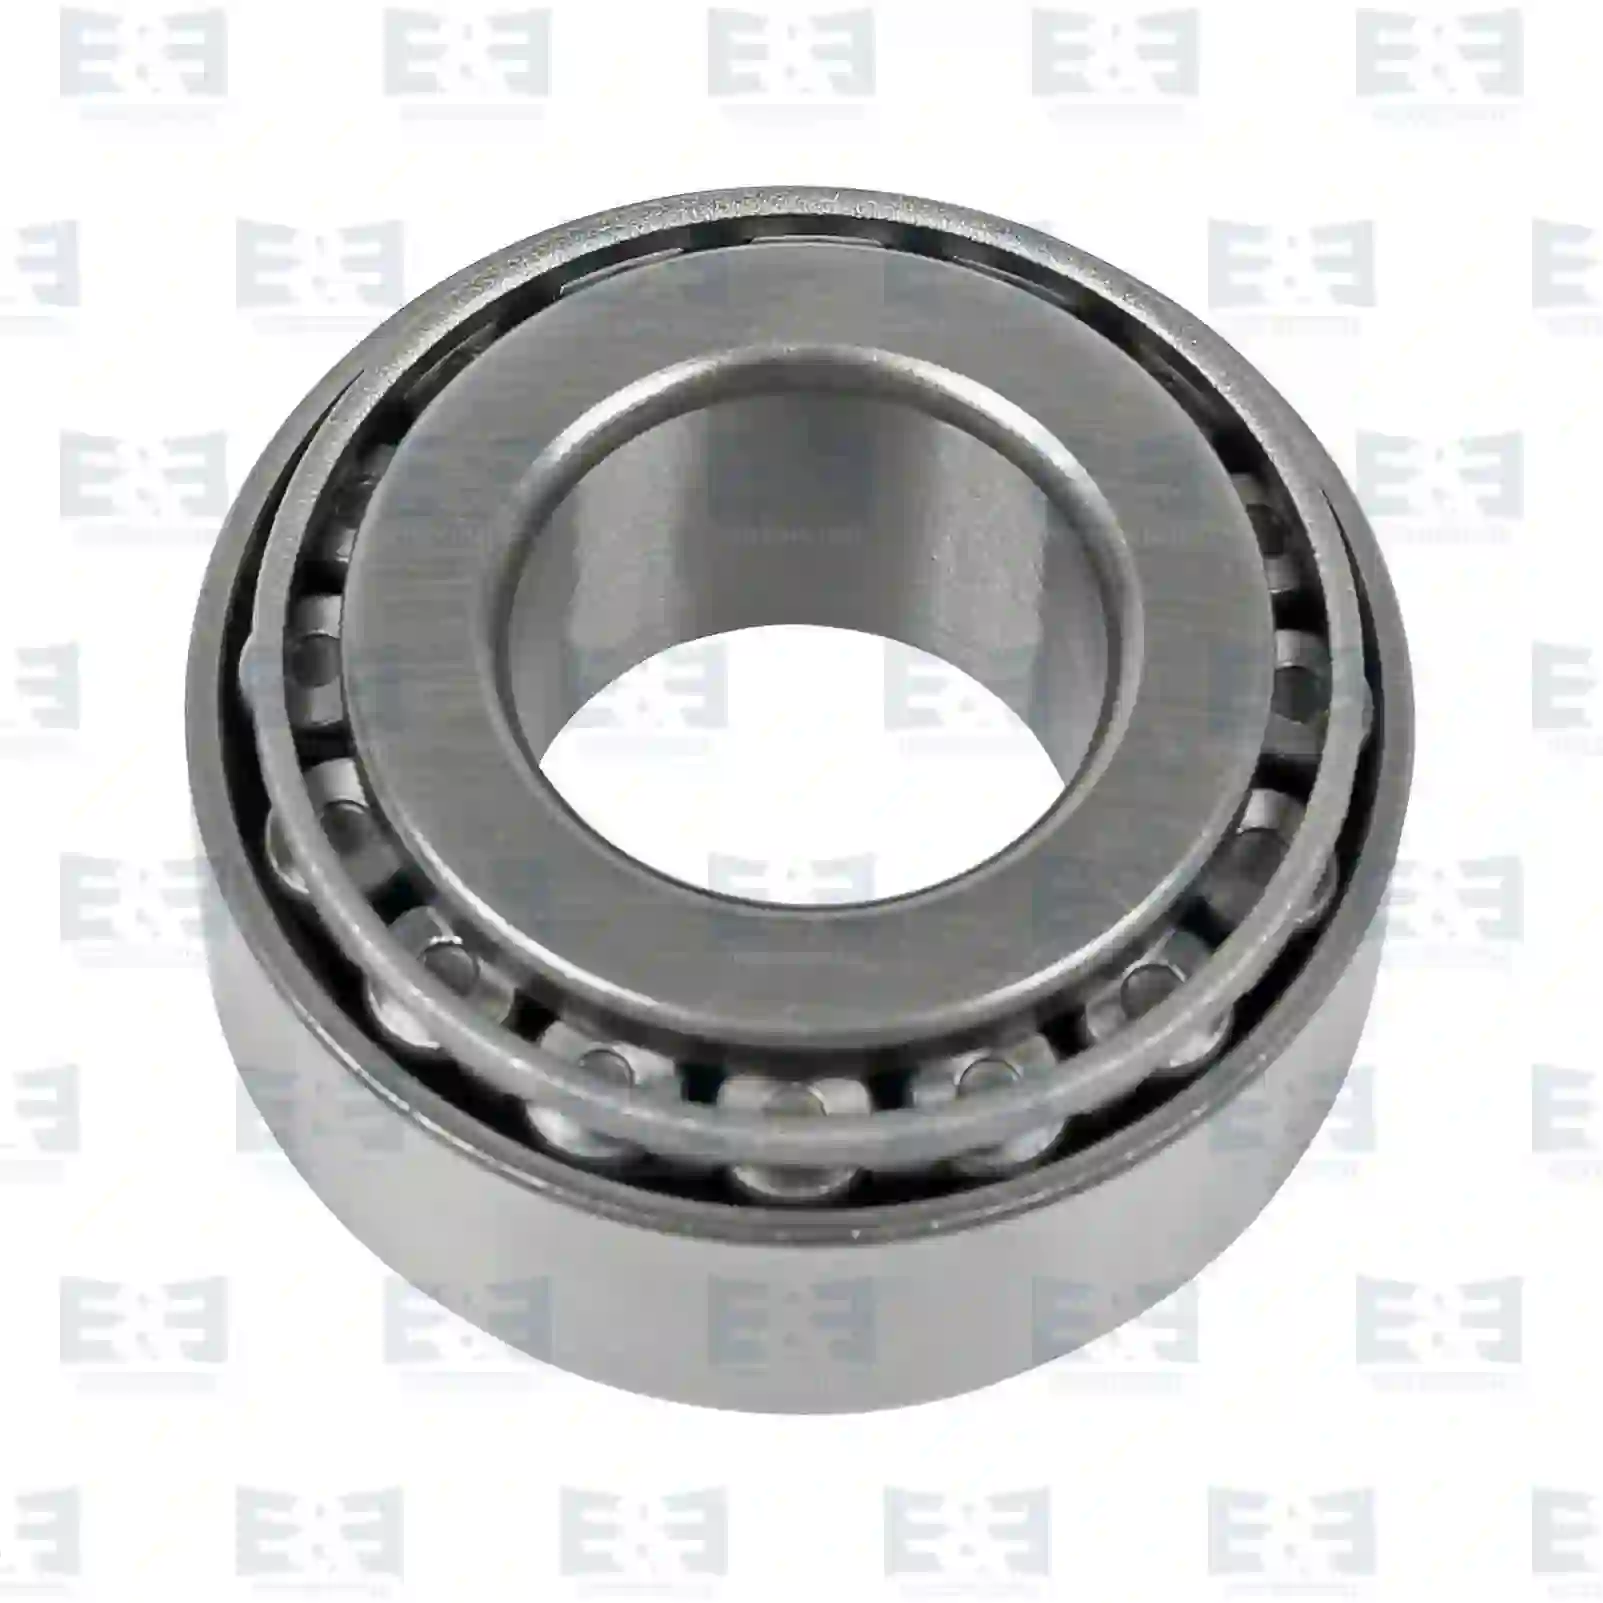 Tapered roller bearing, 2E2284054, 5103869AA, FRC7810, 06324990069, 81320500508, 0039811005, 0039811505, 0039819505, 0059812205, 0069815805, 1409810005, 1409810505, 5001852654, 5003090903, 5010136758, 2D0407625, ZG03018-0008 ||  2E2284054 E&E Truck Spare Parts | Truck Spare Parts, Auotomotive Spare Parts Tapered roller bearing, 2E2284054, 5103869AA, FRC7810, 06324990069, 81320500508, 0039811005, 0039811505, 0039819505, 0059812205, 0069815805, 1409810005, 1409810505, 5001852654, 5003090903, 5010136758, 2D0407625, ZG03018-0008 ||  2E2284054 E&E Truck Spare Parts | Truck Spare Parts, Auotomotive Spare Parts